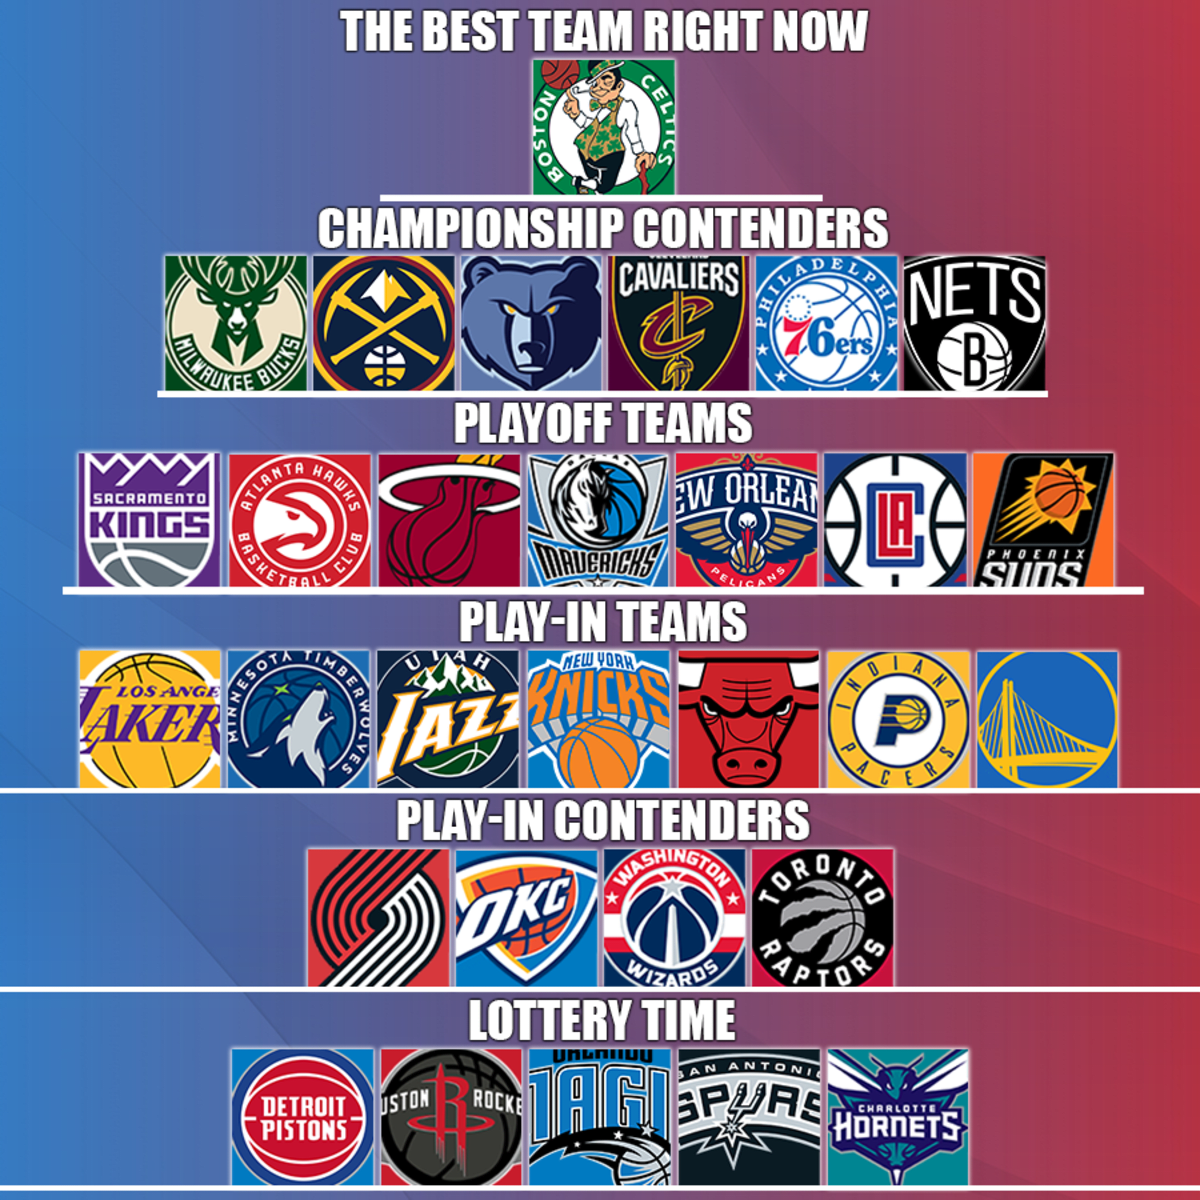 Ranking The Best And Worst NBA Teams By Tiers: Bucks, Lakers And